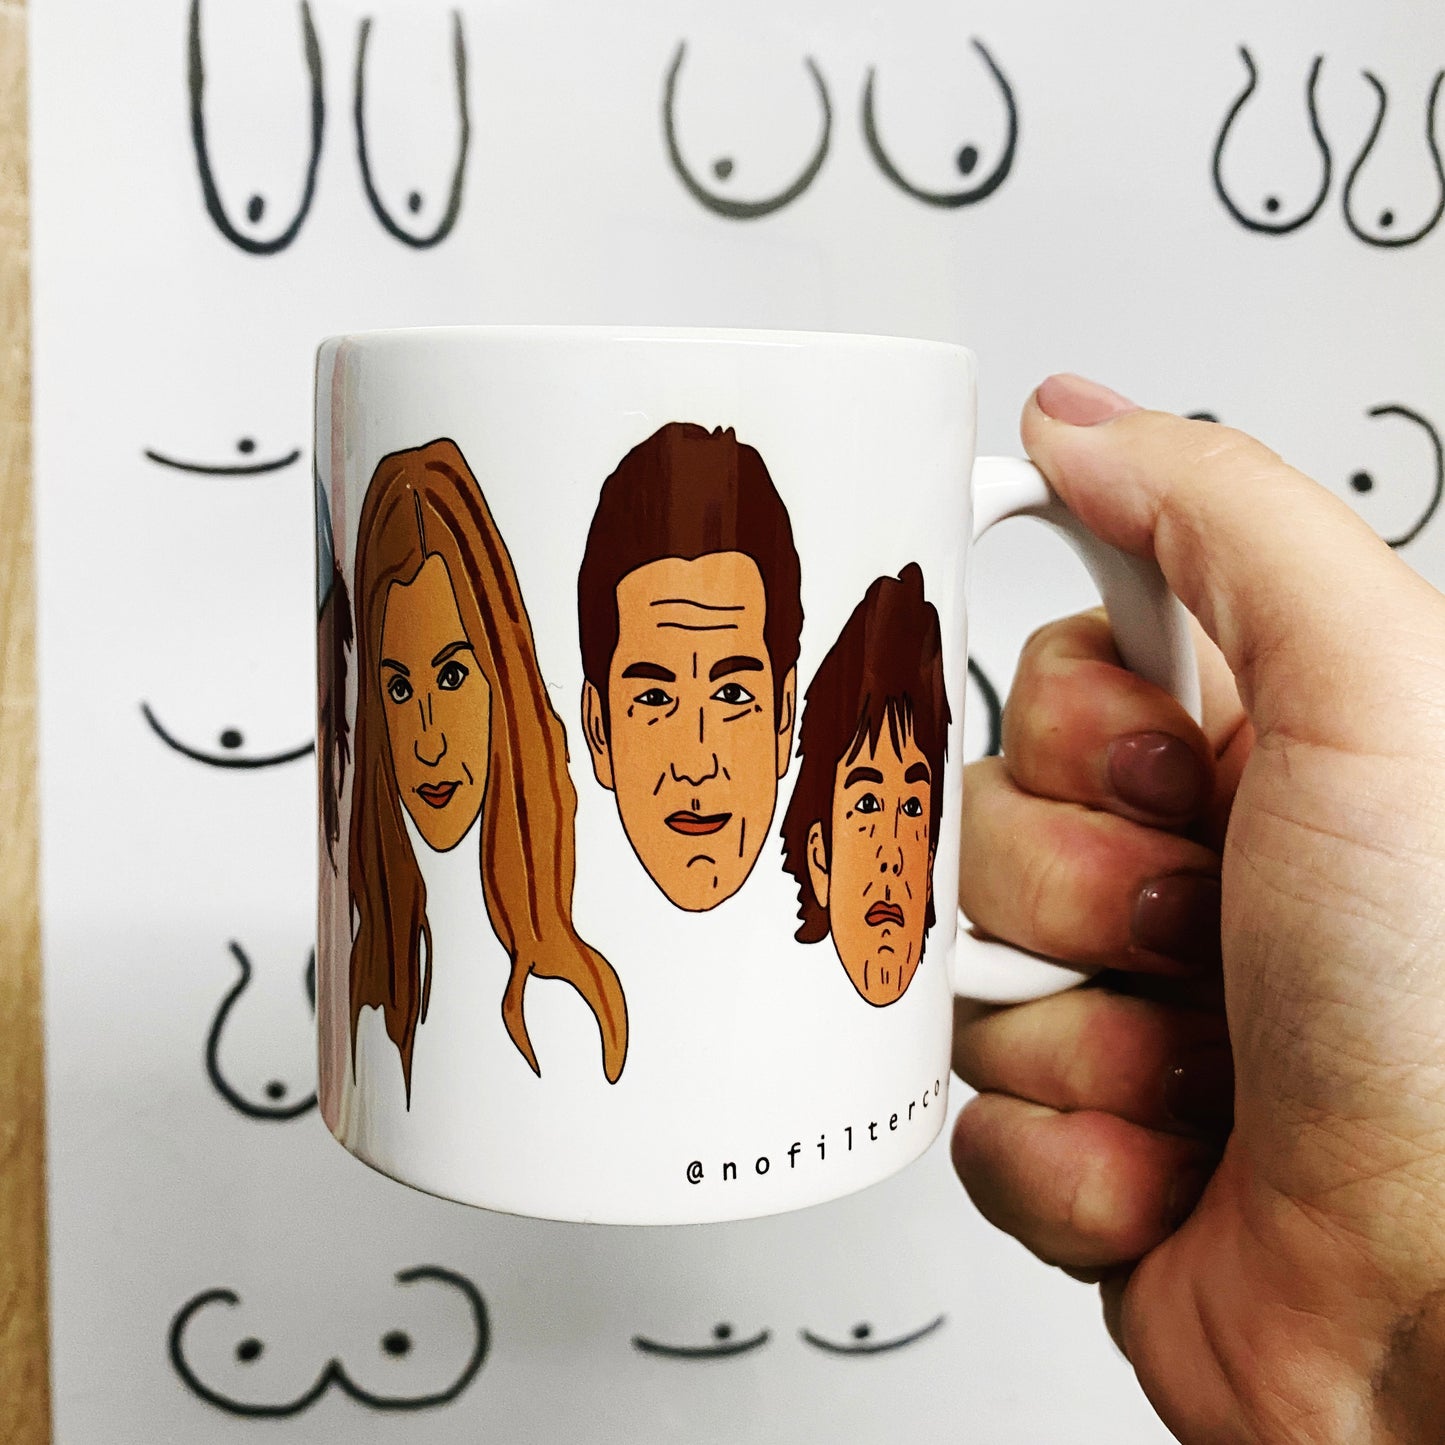 Outrageous fortune mug